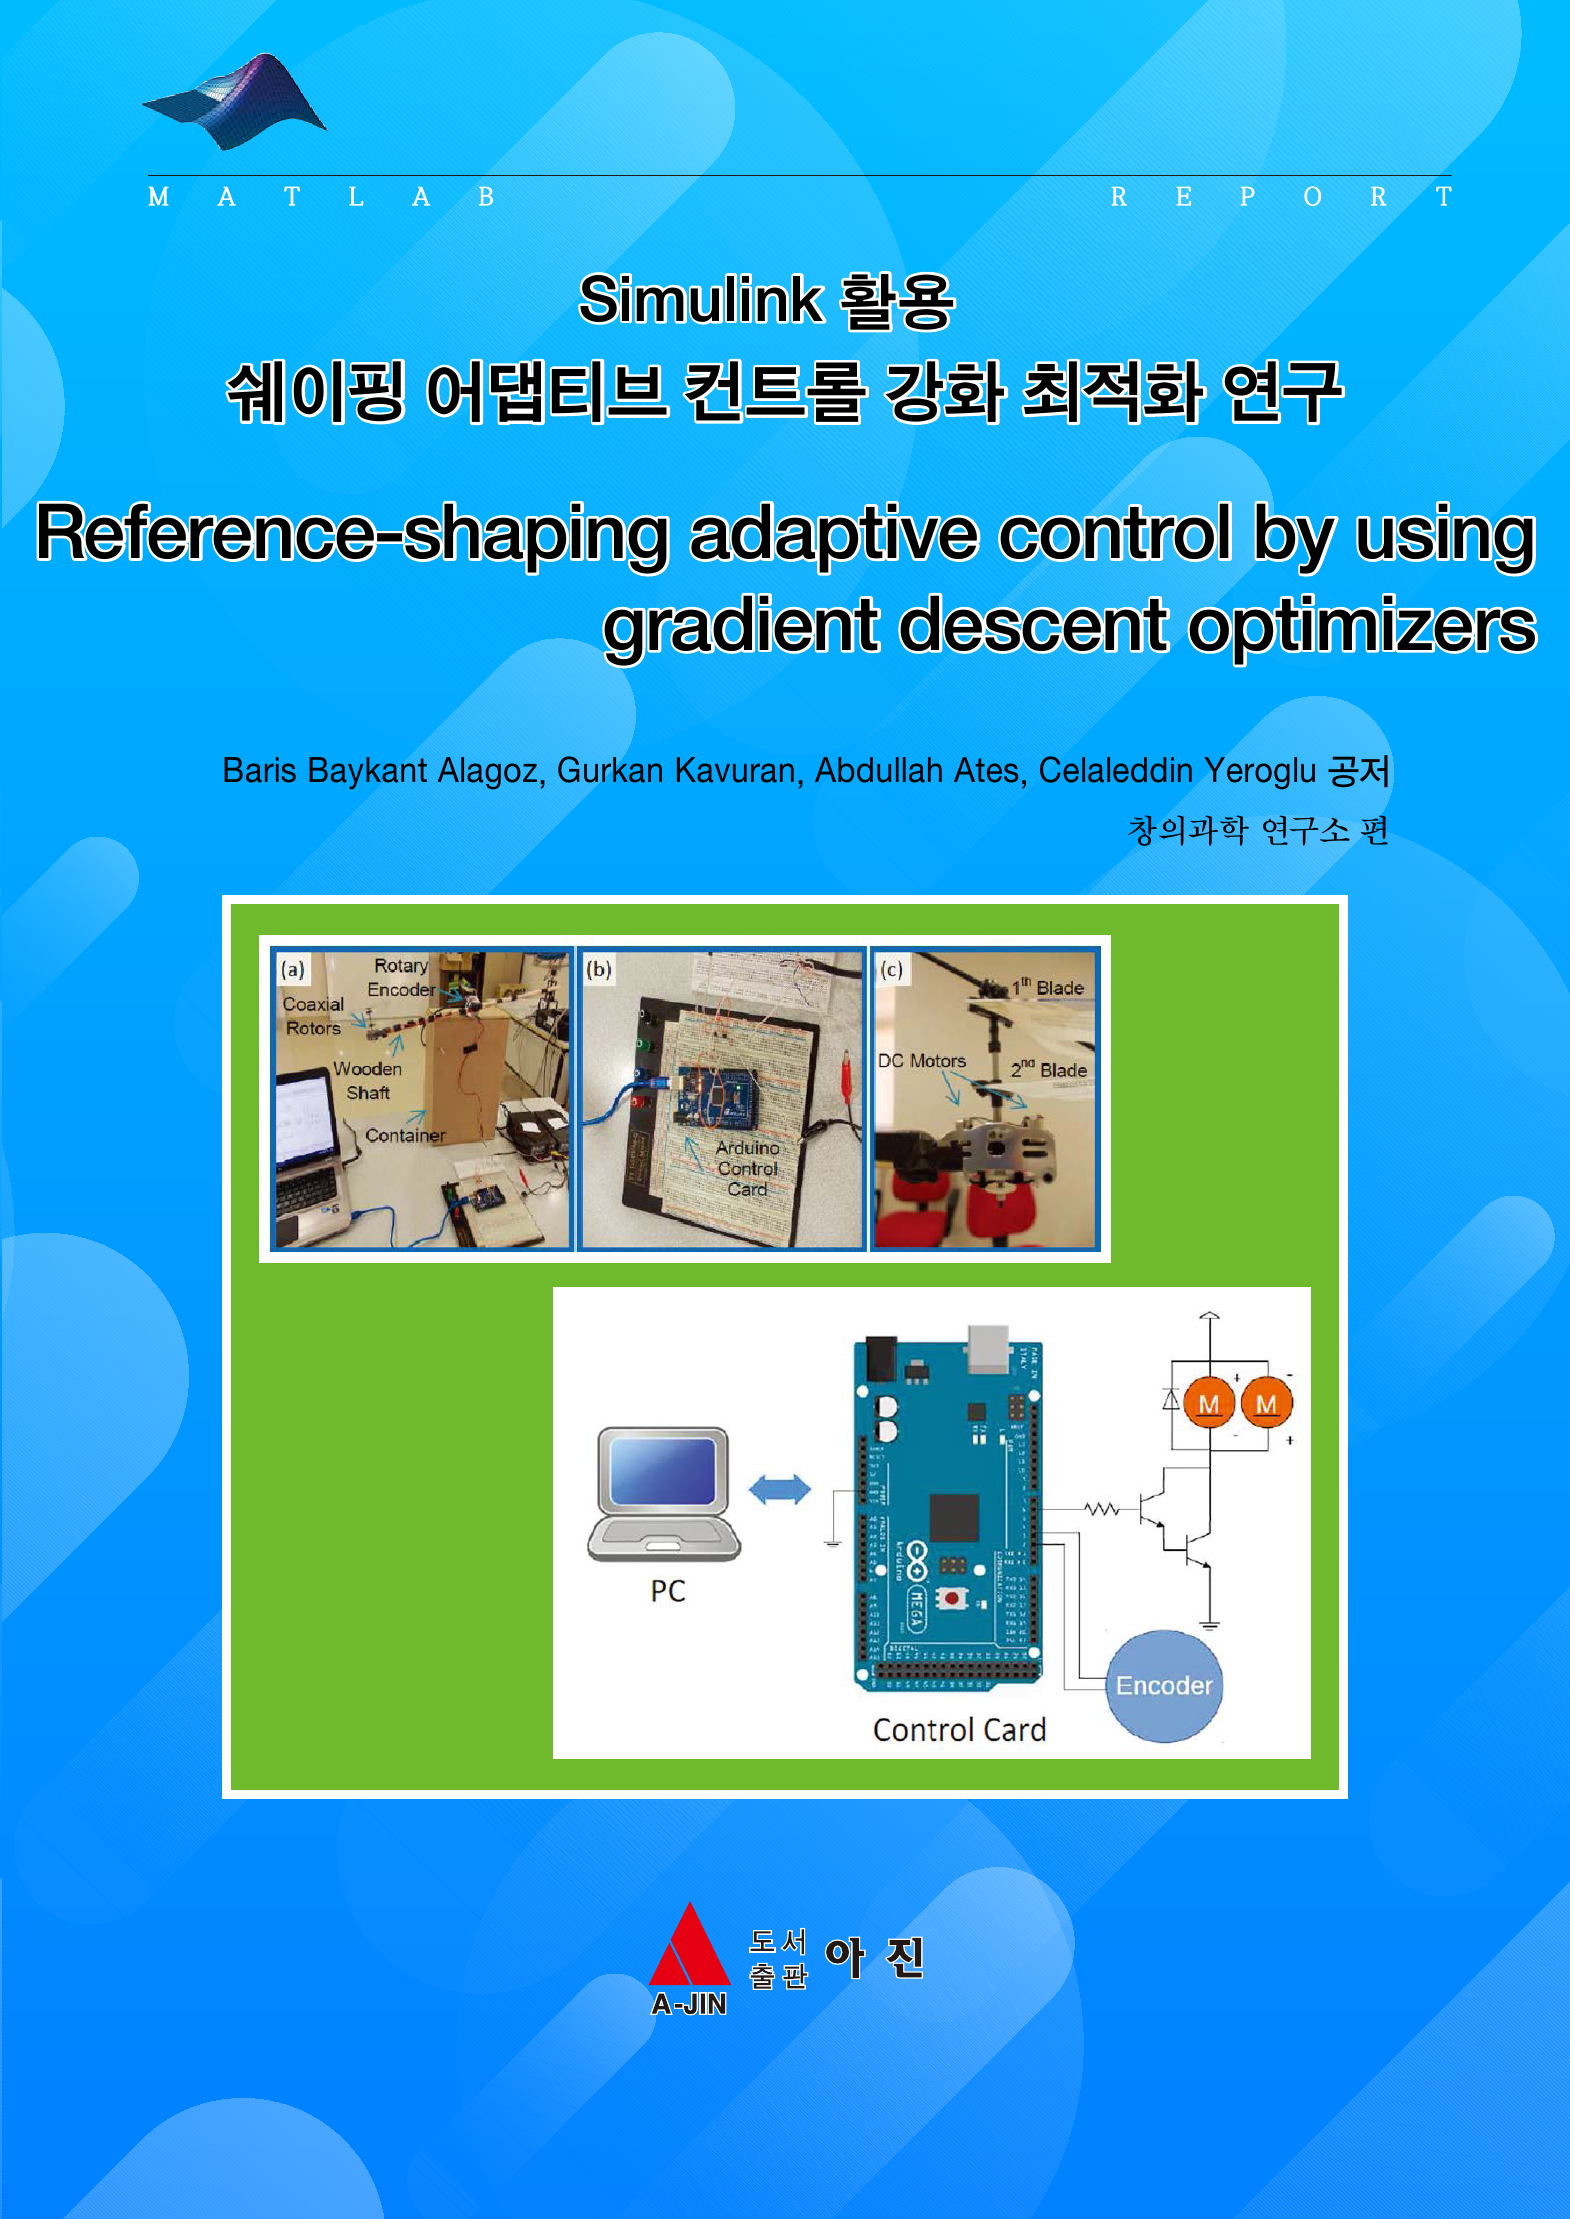 Simulink 활용 쉐이핑 어댑티브 컨트롤 강화 최적화 연구(Reference-shaping adaptive control by using gradient descent optimizers)